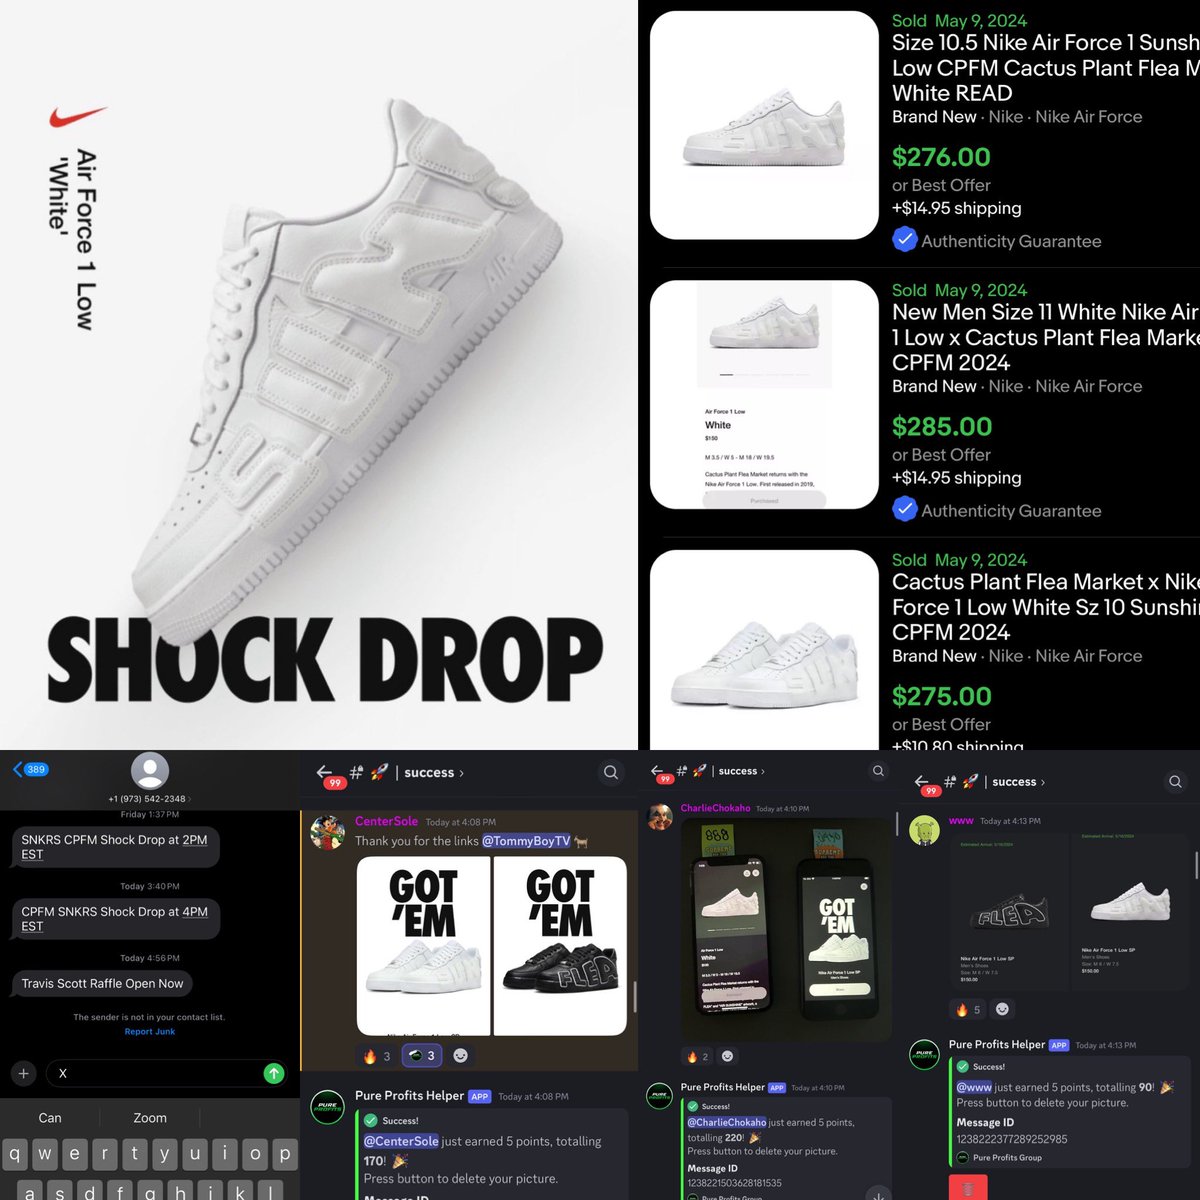 Early Info ✅ Text Alerts ✅ Direct Links ✅ Stock Numbers ✅ Another exciting SNKRS Shock Drop down in the books!